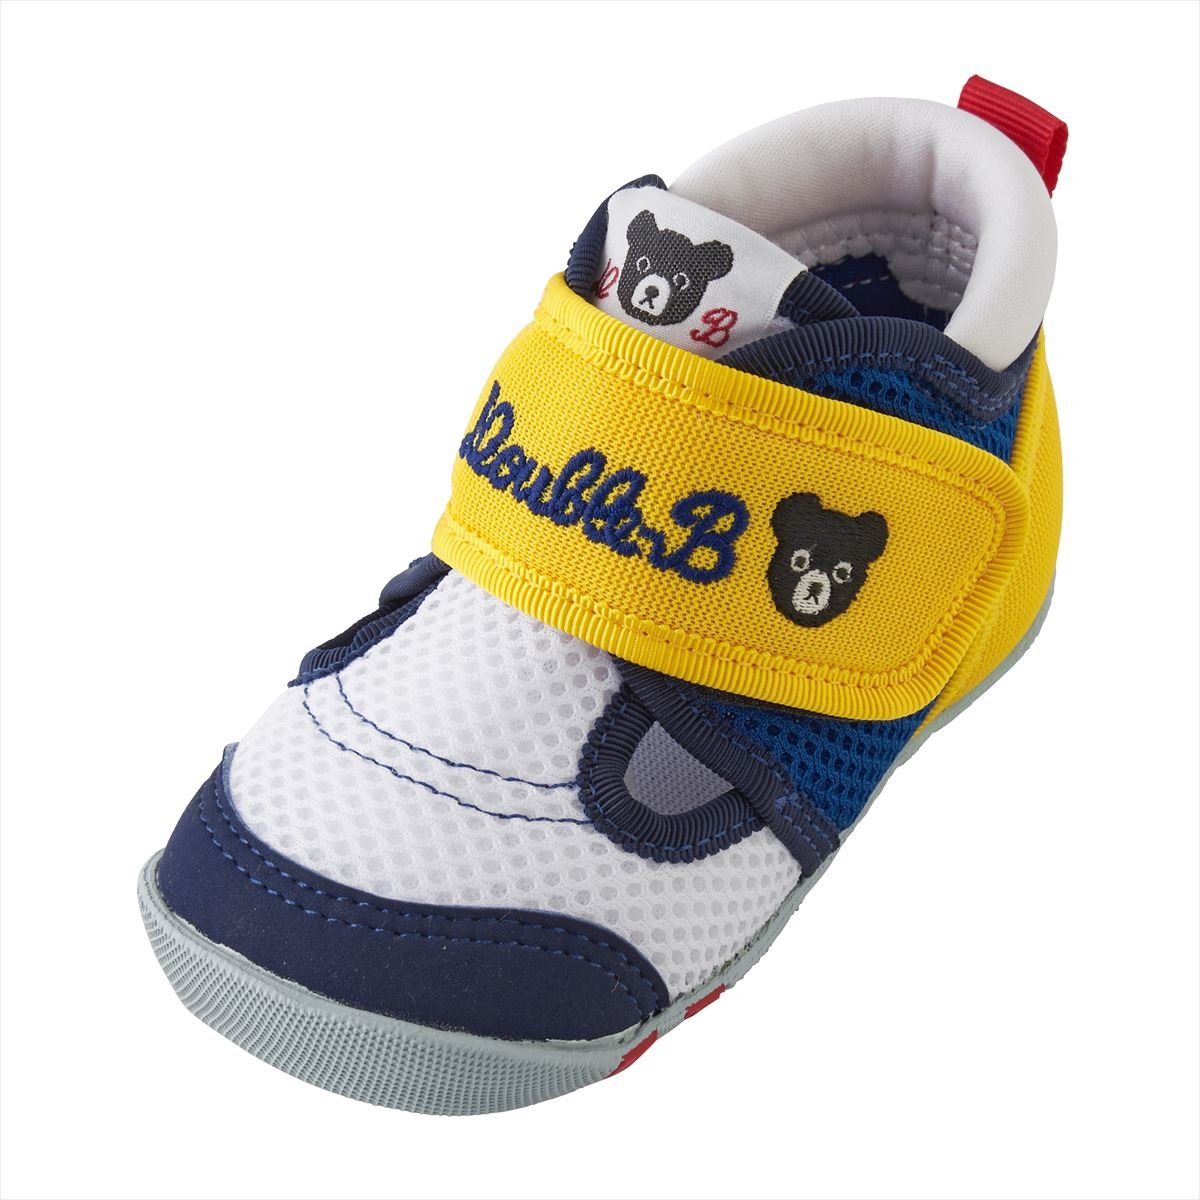 Double Russell Mesh First Shoes - B for Bold - 62-9302-572-03-11H